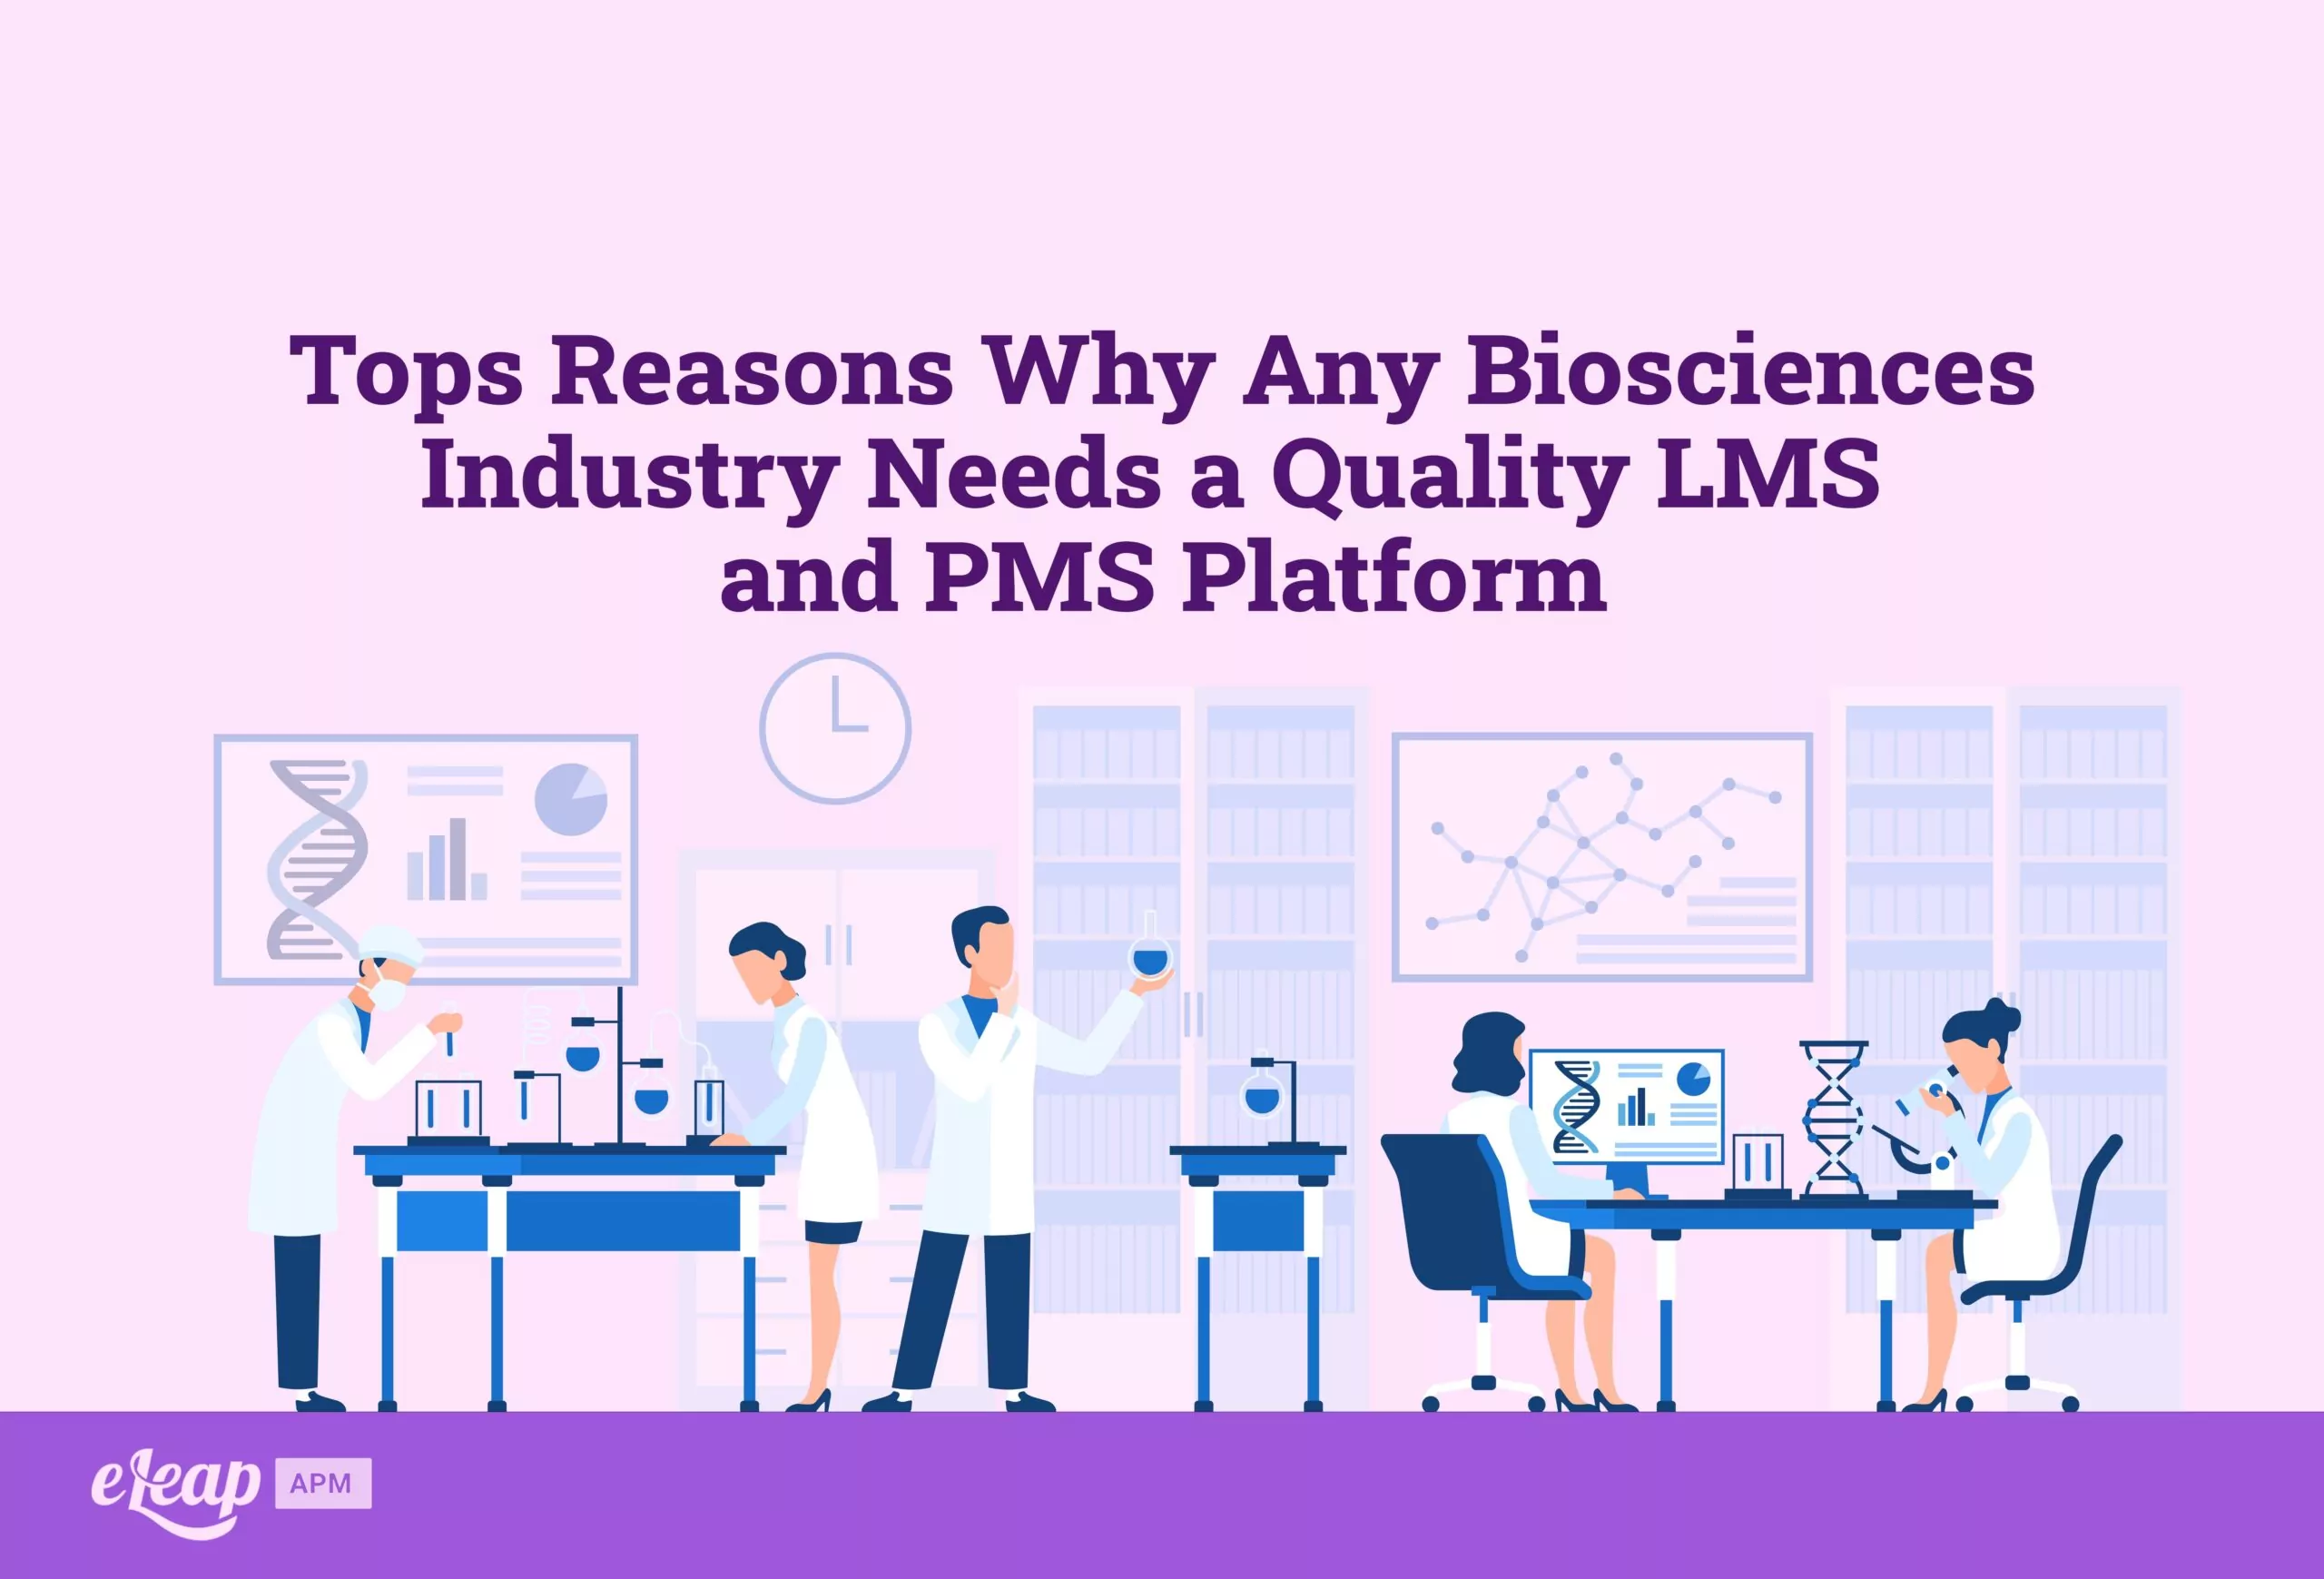 Top Reasons Why Any Biosciences Industry Needs a Quality LMS and PMS Platform